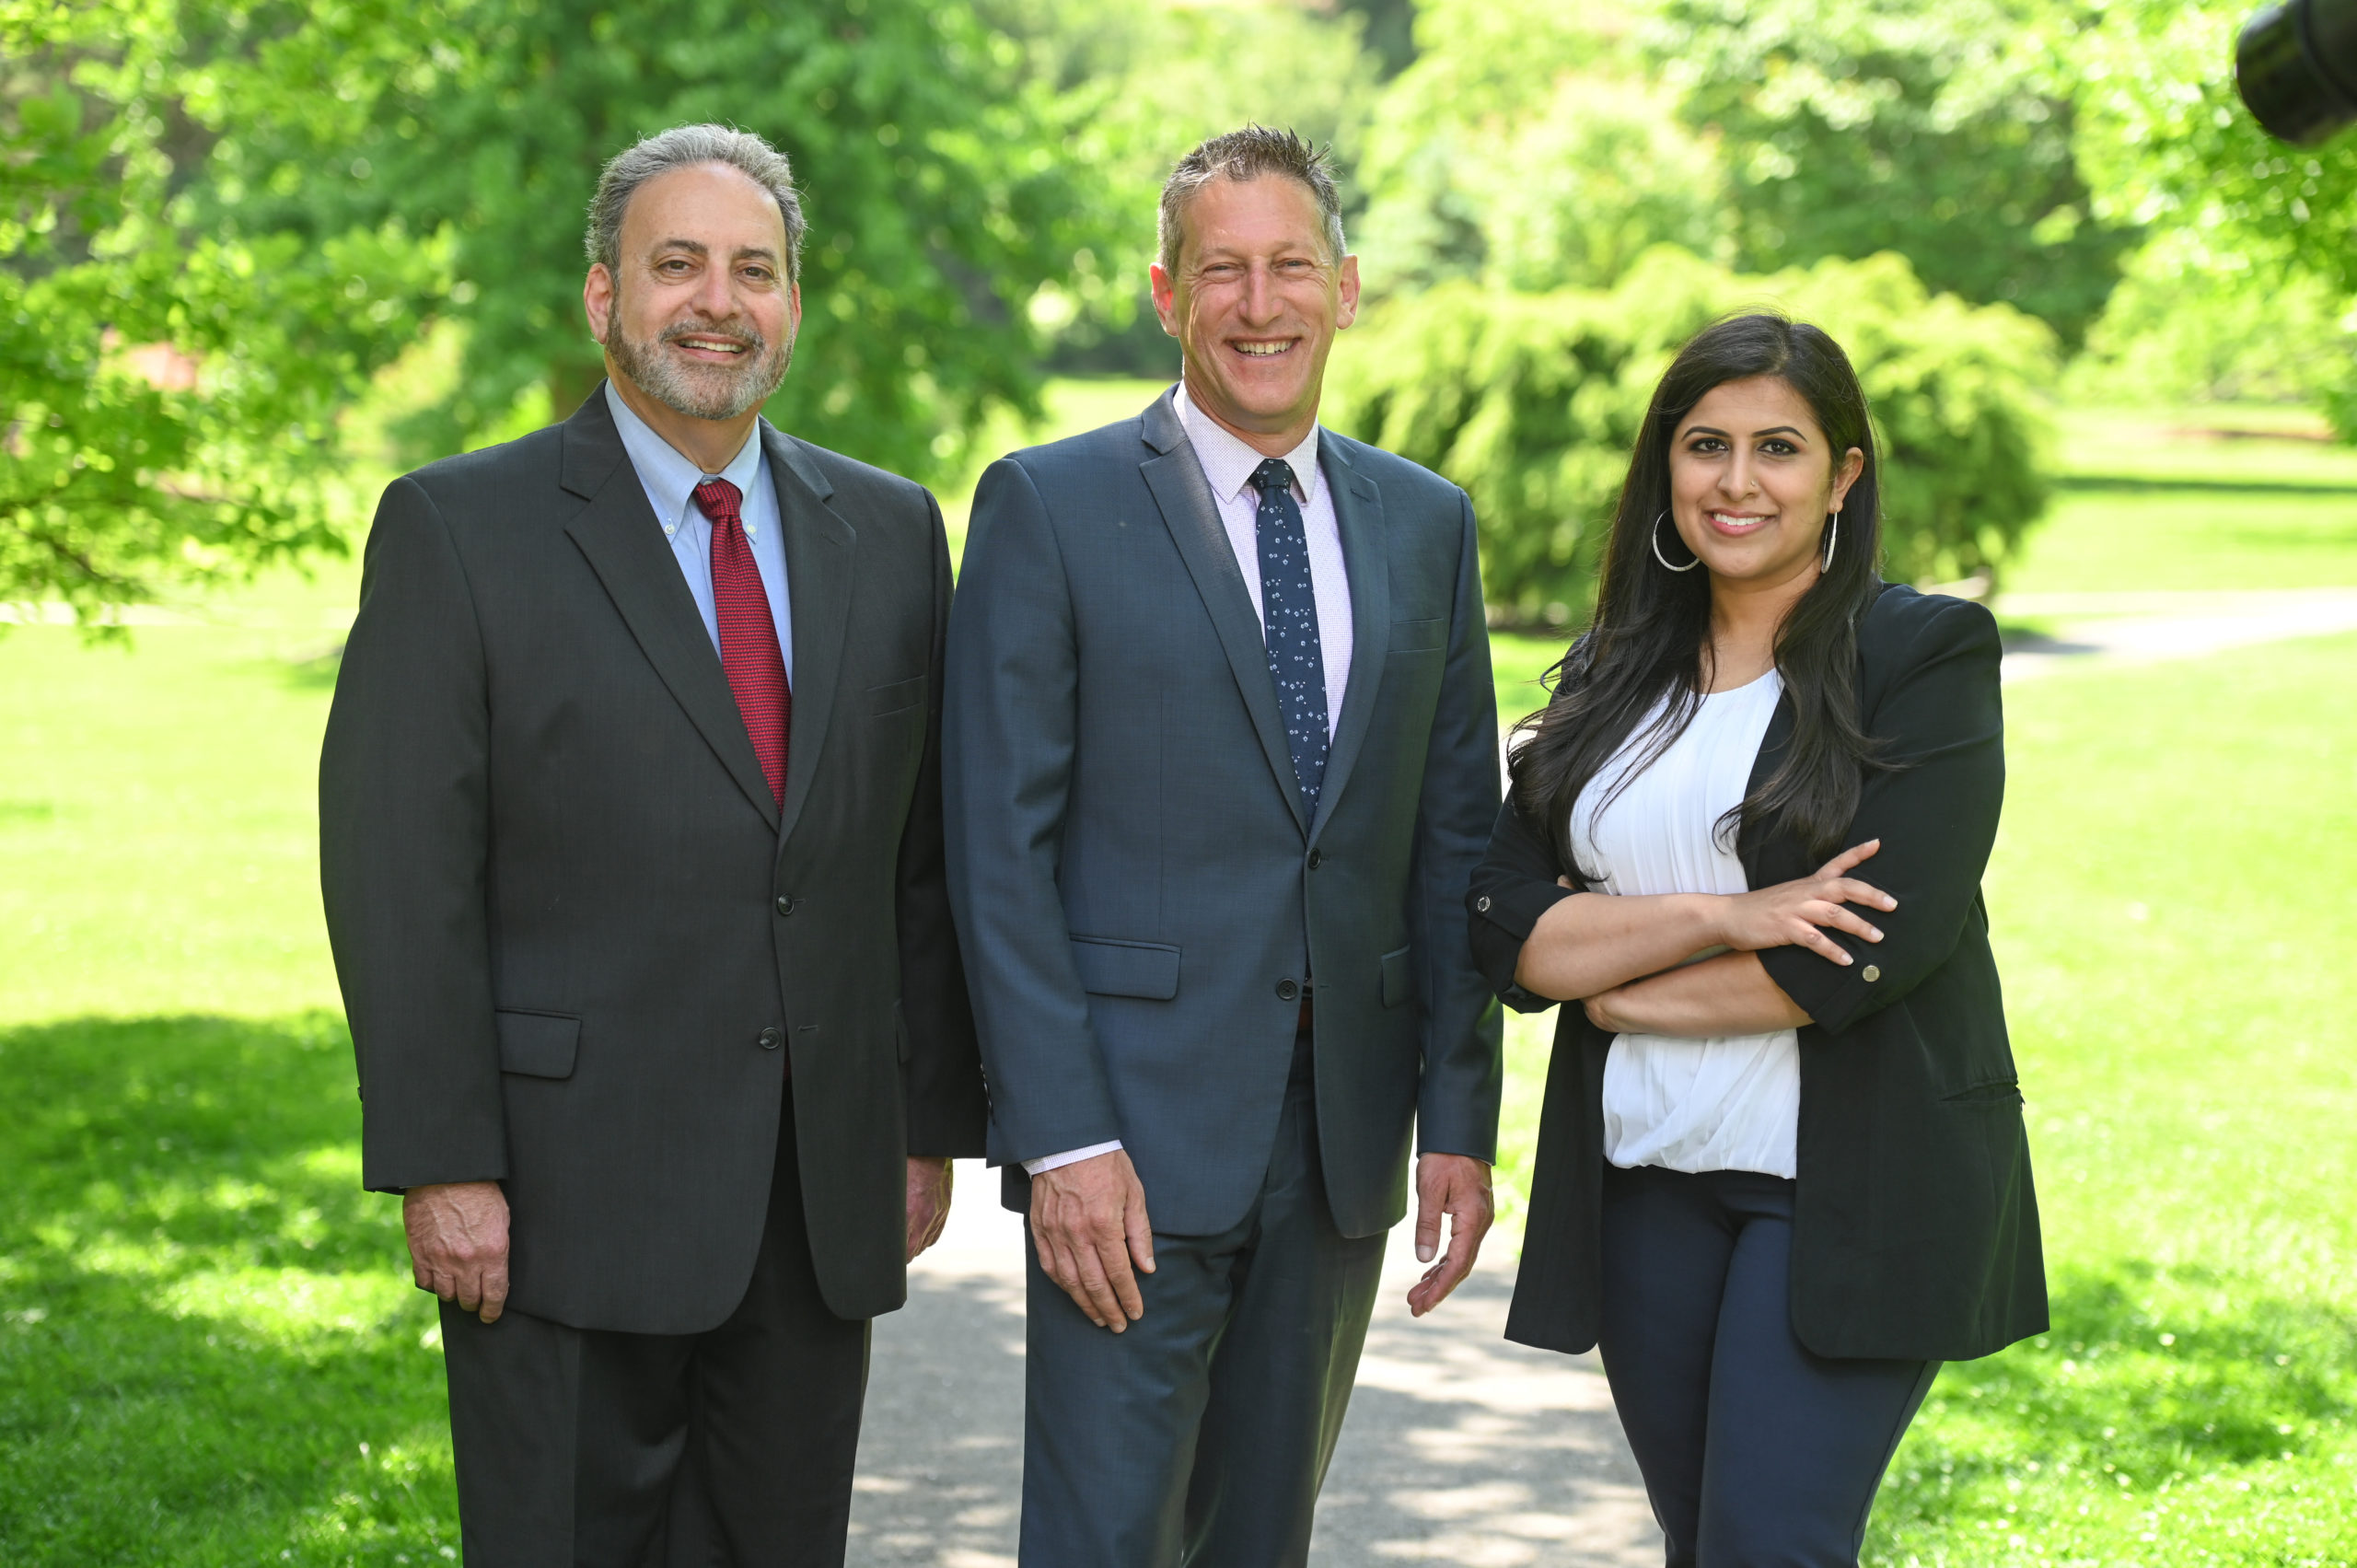 Andrew Zwicker, Roy Freiman, and Sadaf Jaffer pose for a team photo in the park.